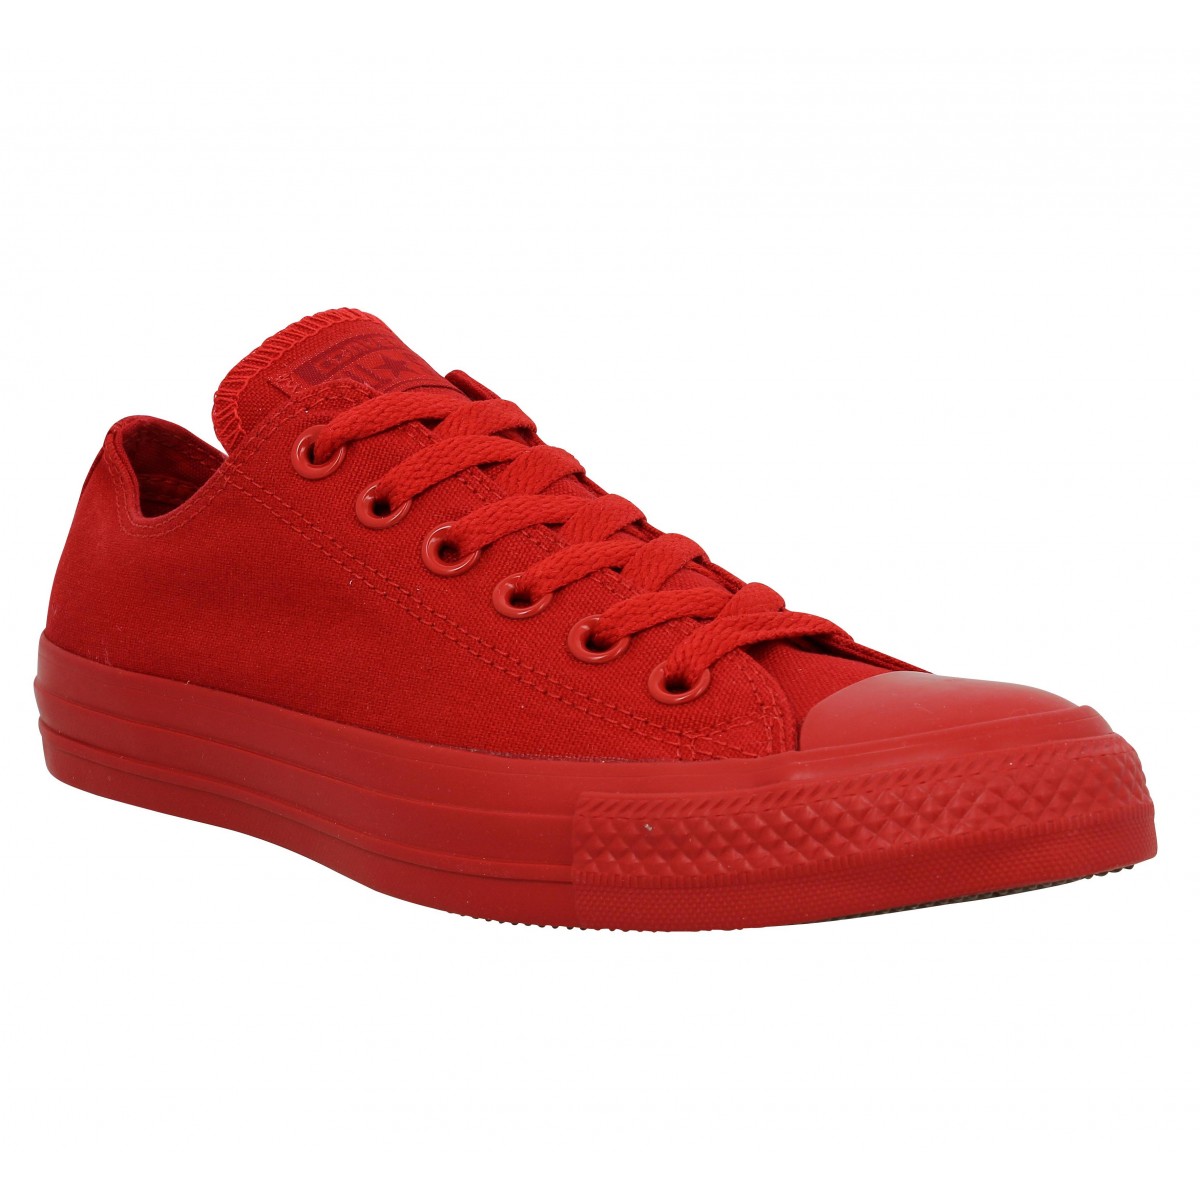 converse all star chuck taylor rouge